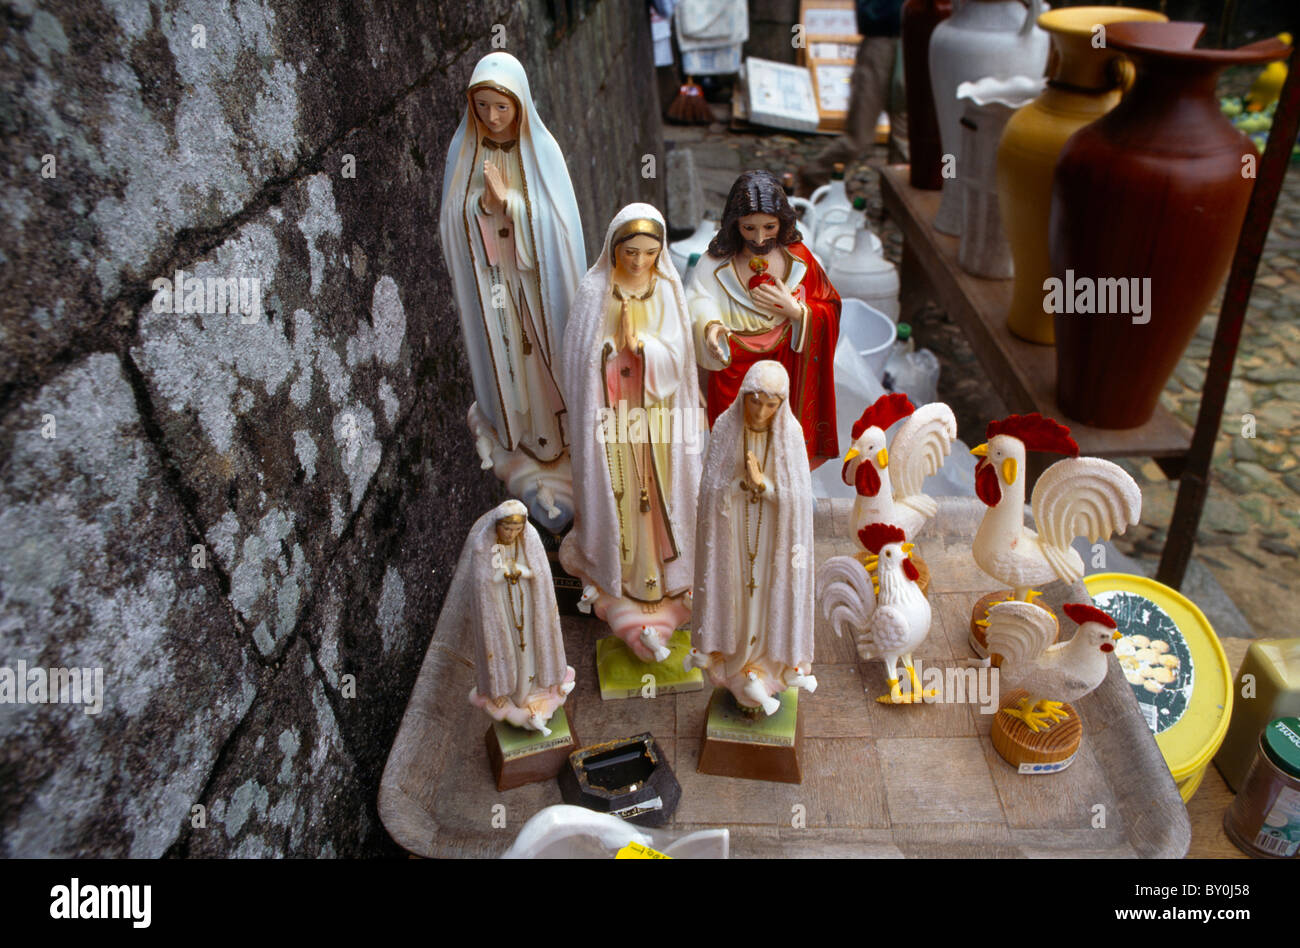 Valenca De Minho Portugal Crossing Point From Portugal To Spain Stall Selling Figurines Of Jesus Christ The Virgin Mary Stock Photo